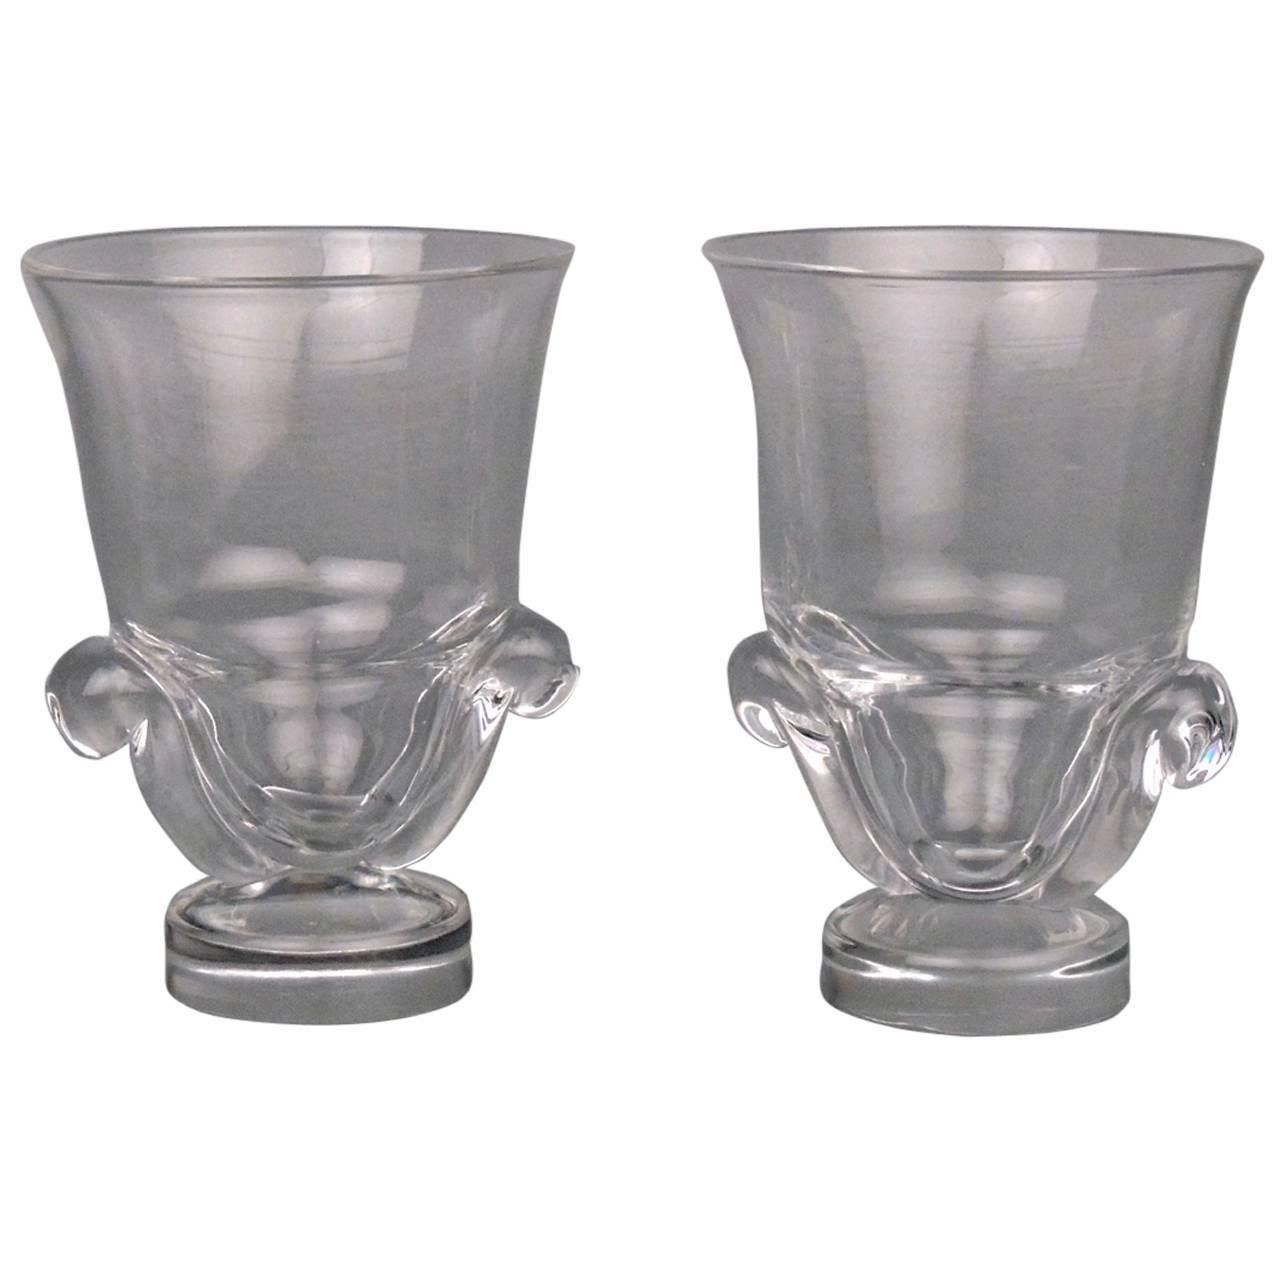 Pair of Mid-Century Modern Steuben Glass Scroll Handle Vases by George Thompson